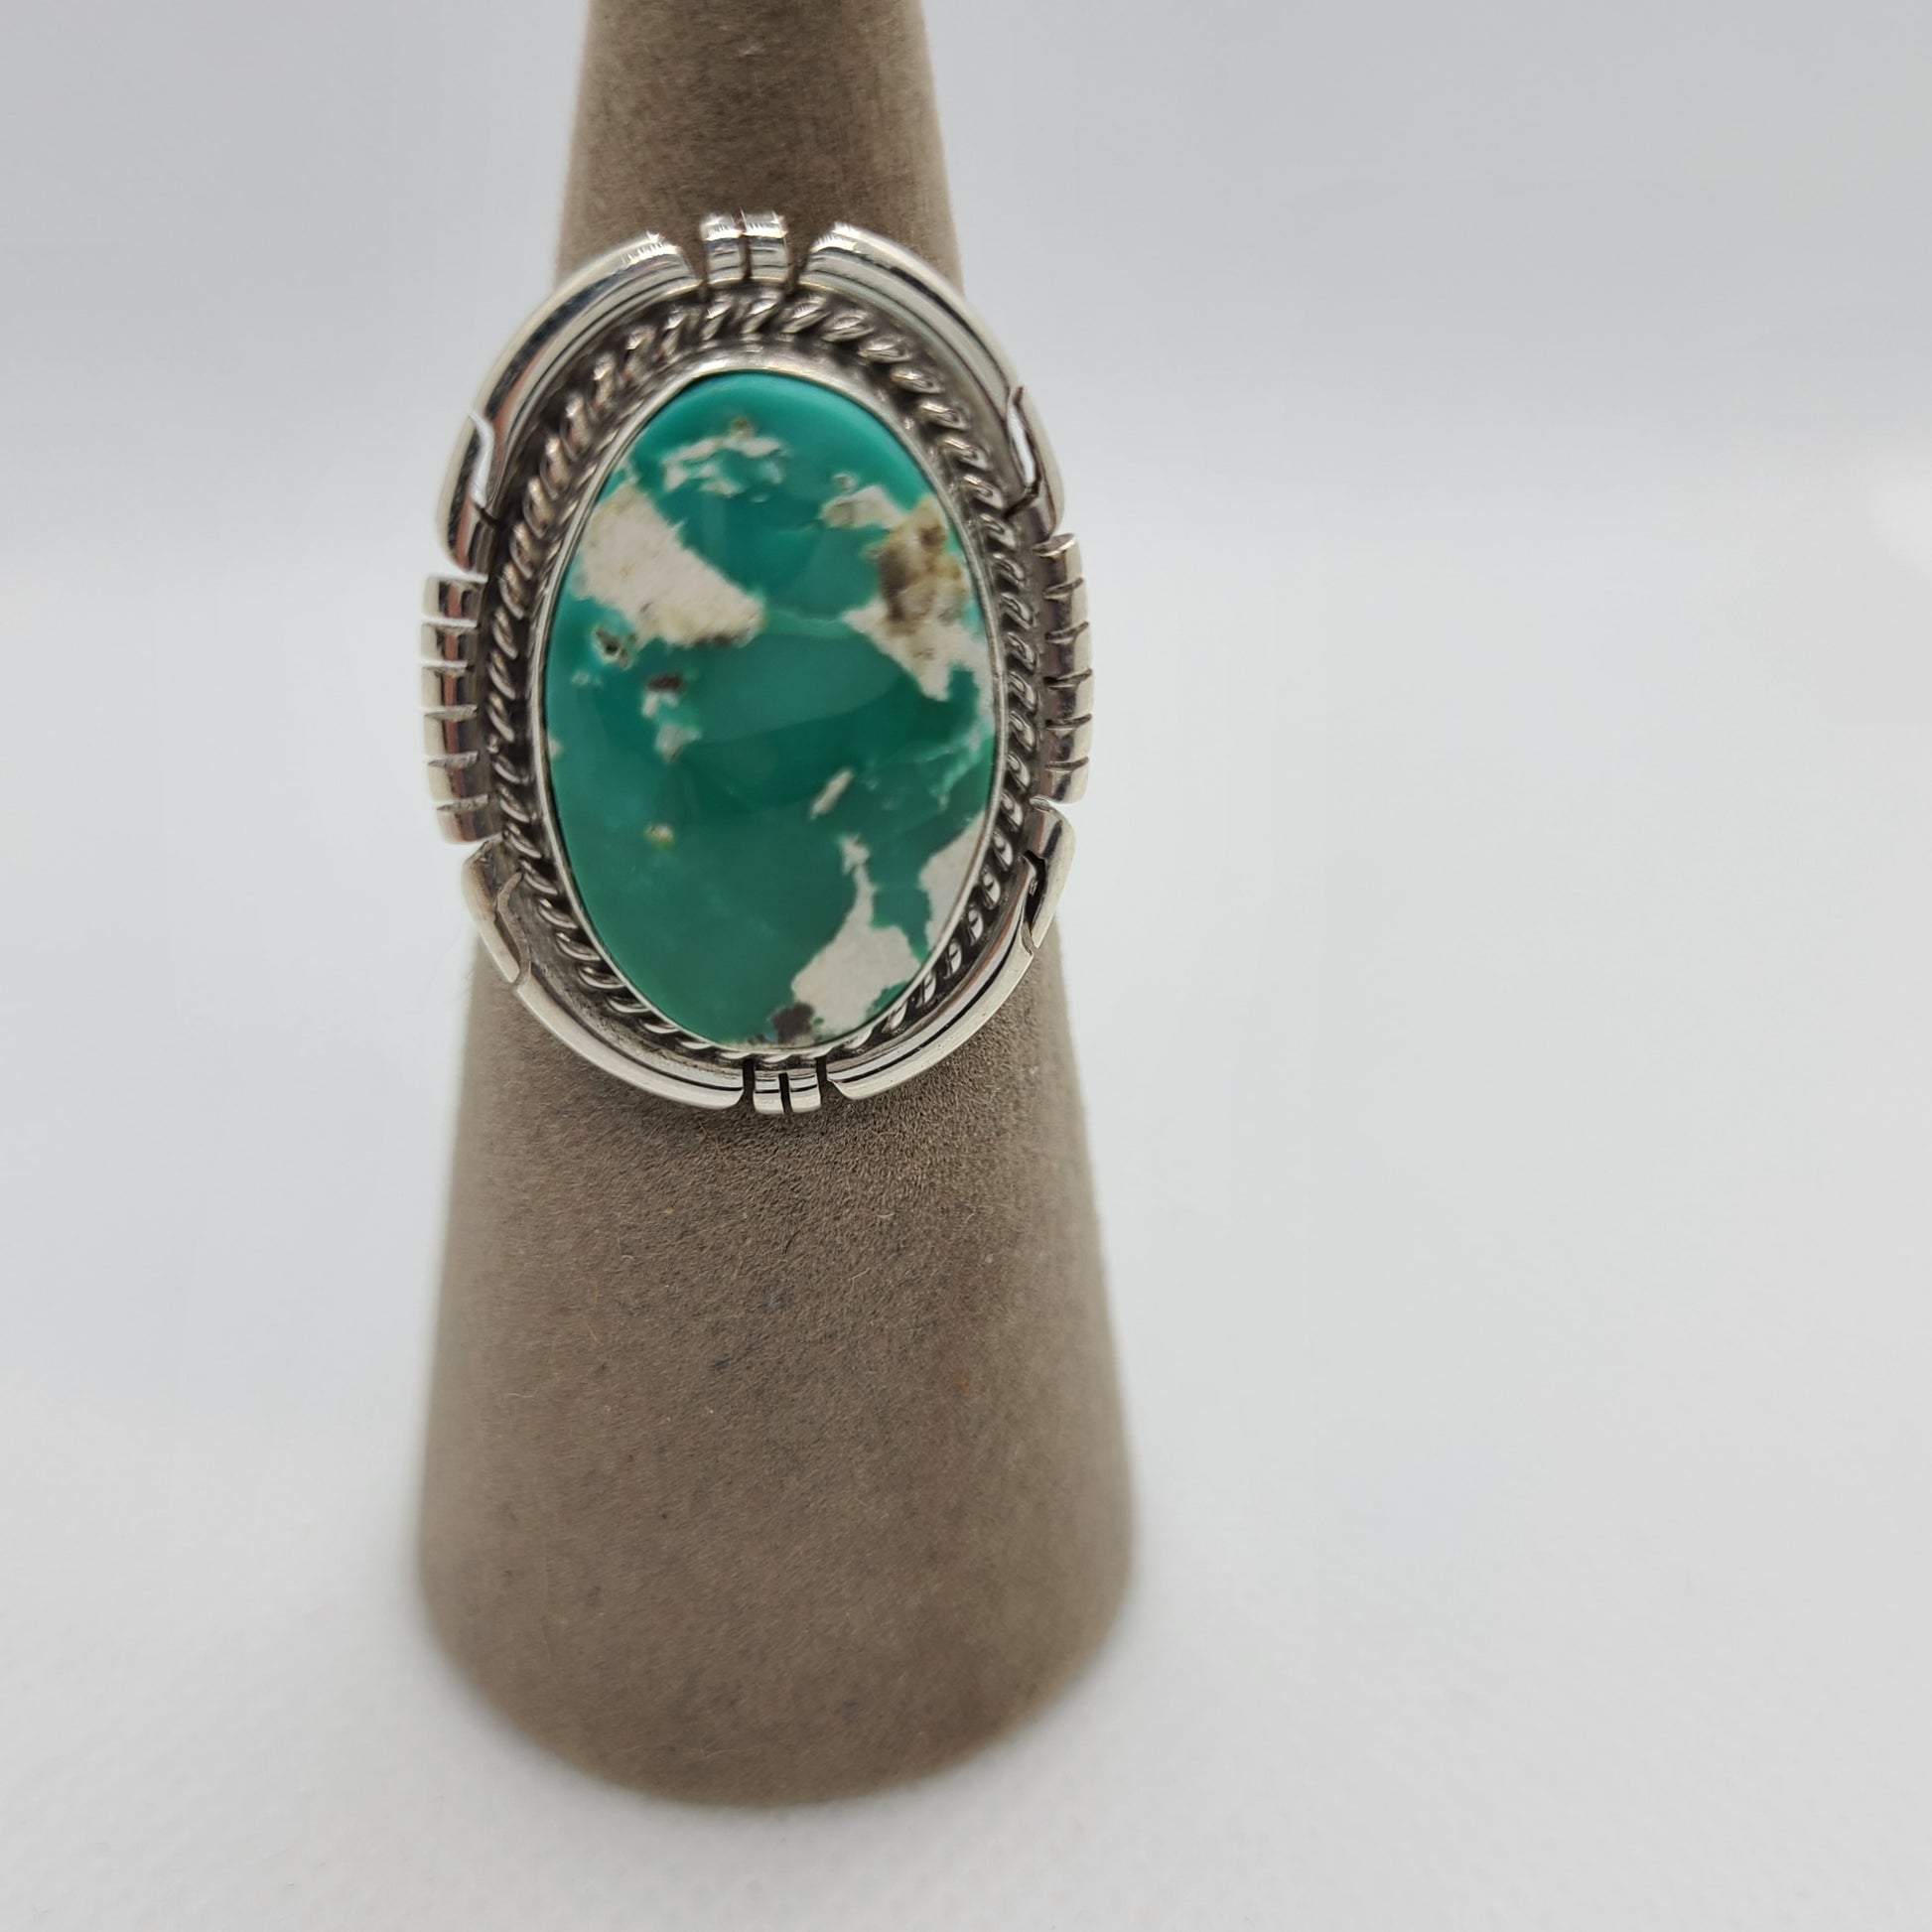 Green, white and brown oval Royston Turquoise stone.  Large oval bezel set with saw-cut backplate and twisted wire around the stone.  Size 7. Certificate of Authenticity included. Navajo artist, Dave Skeets. The ring is a little larger than a quarter.